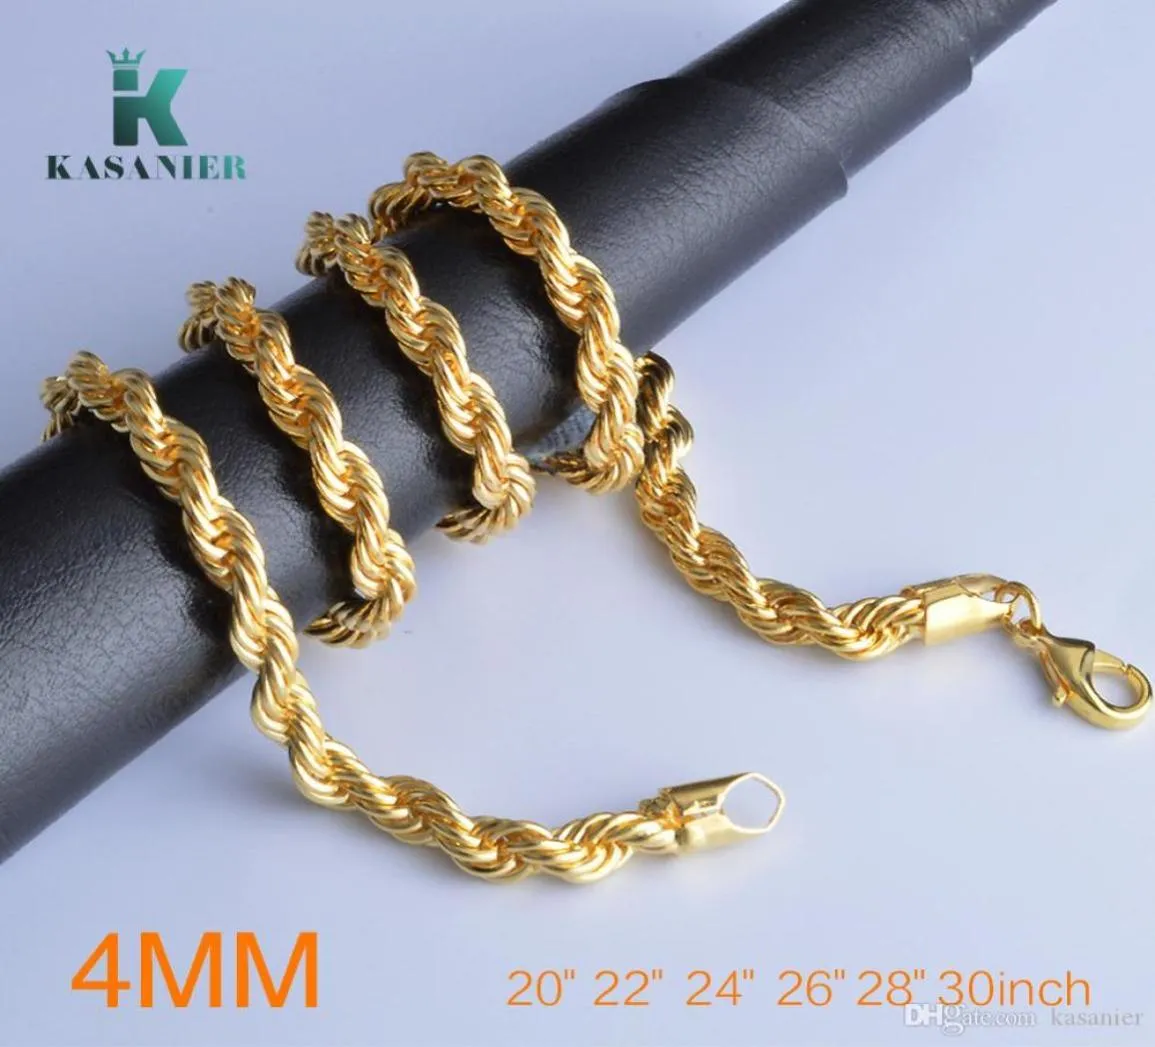 10pcs 2030 inches in Length For 4mm Width Classic Necklace Men Jewelry Necklace Thin Rope Gold and Silver Chain Fashion6879200